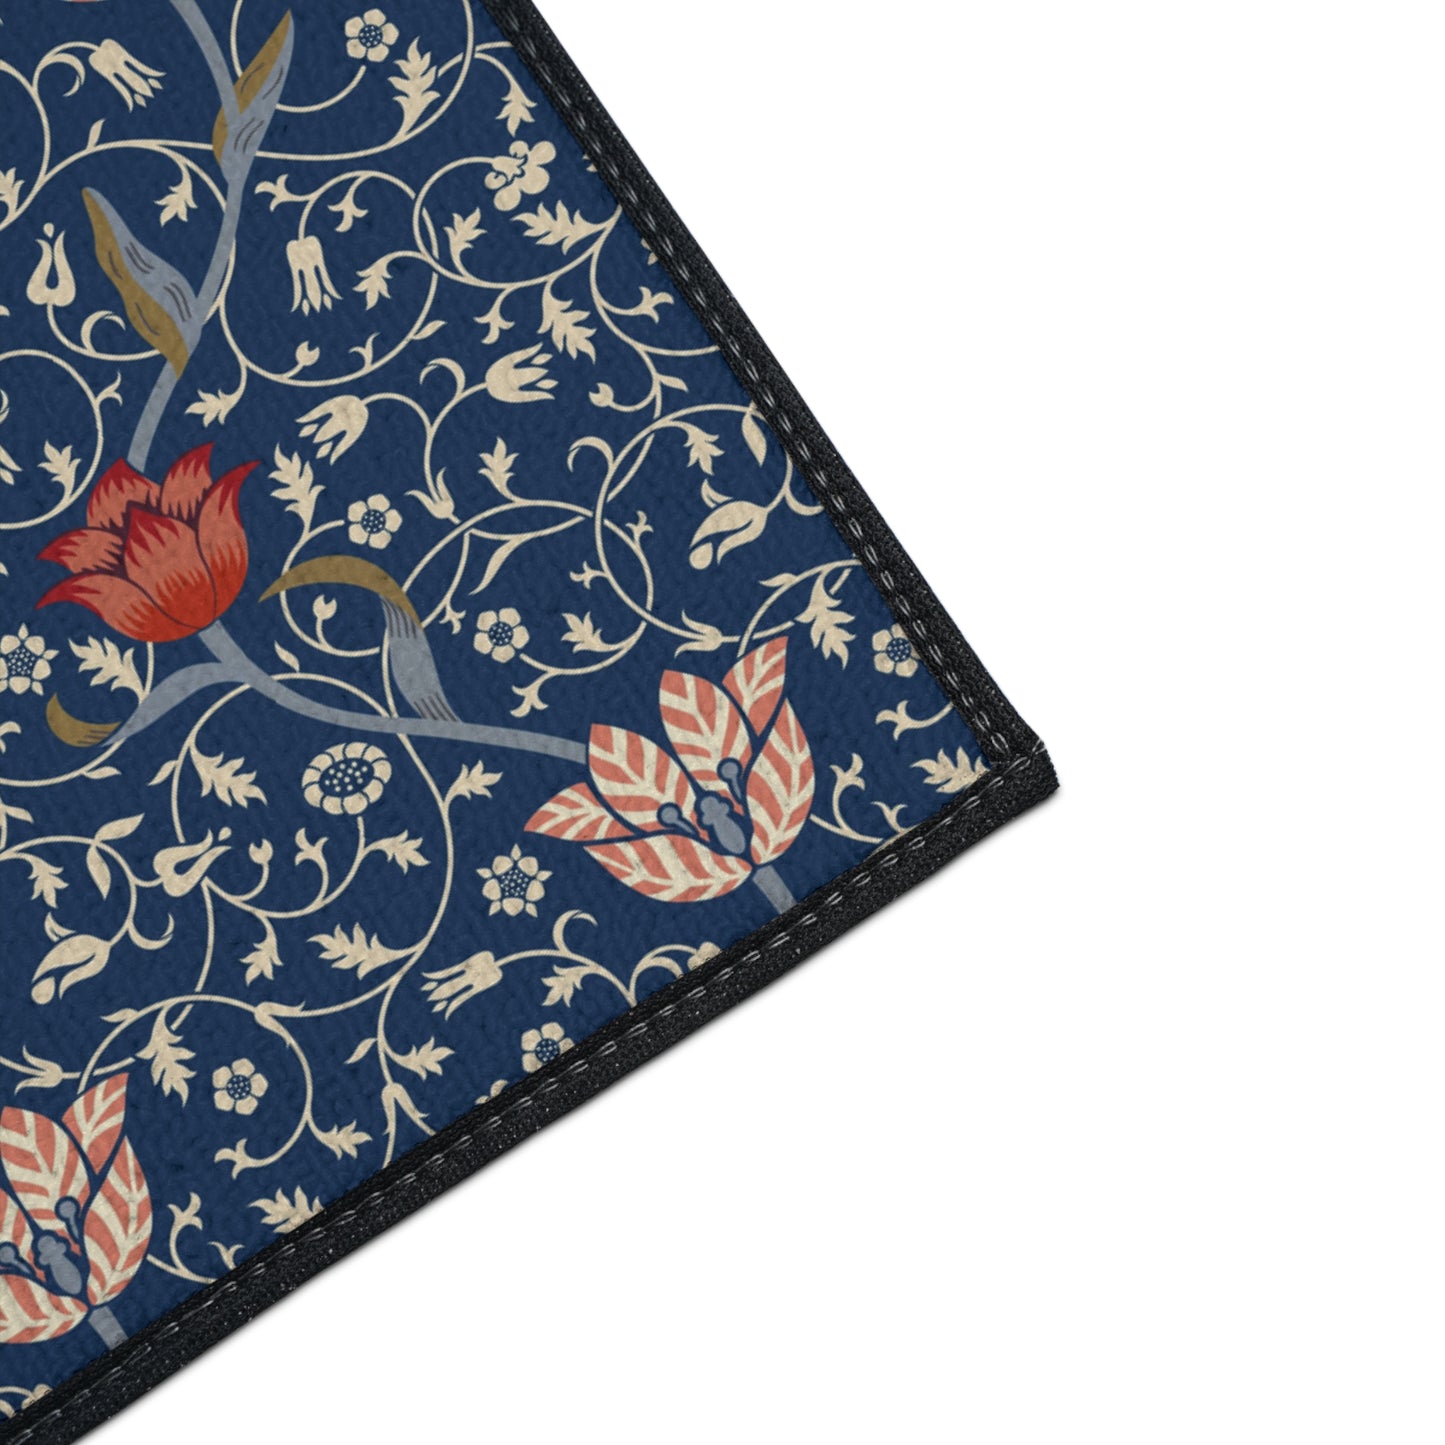 william-morris-co-heavy-duty-floor-mat-medway-collection-18